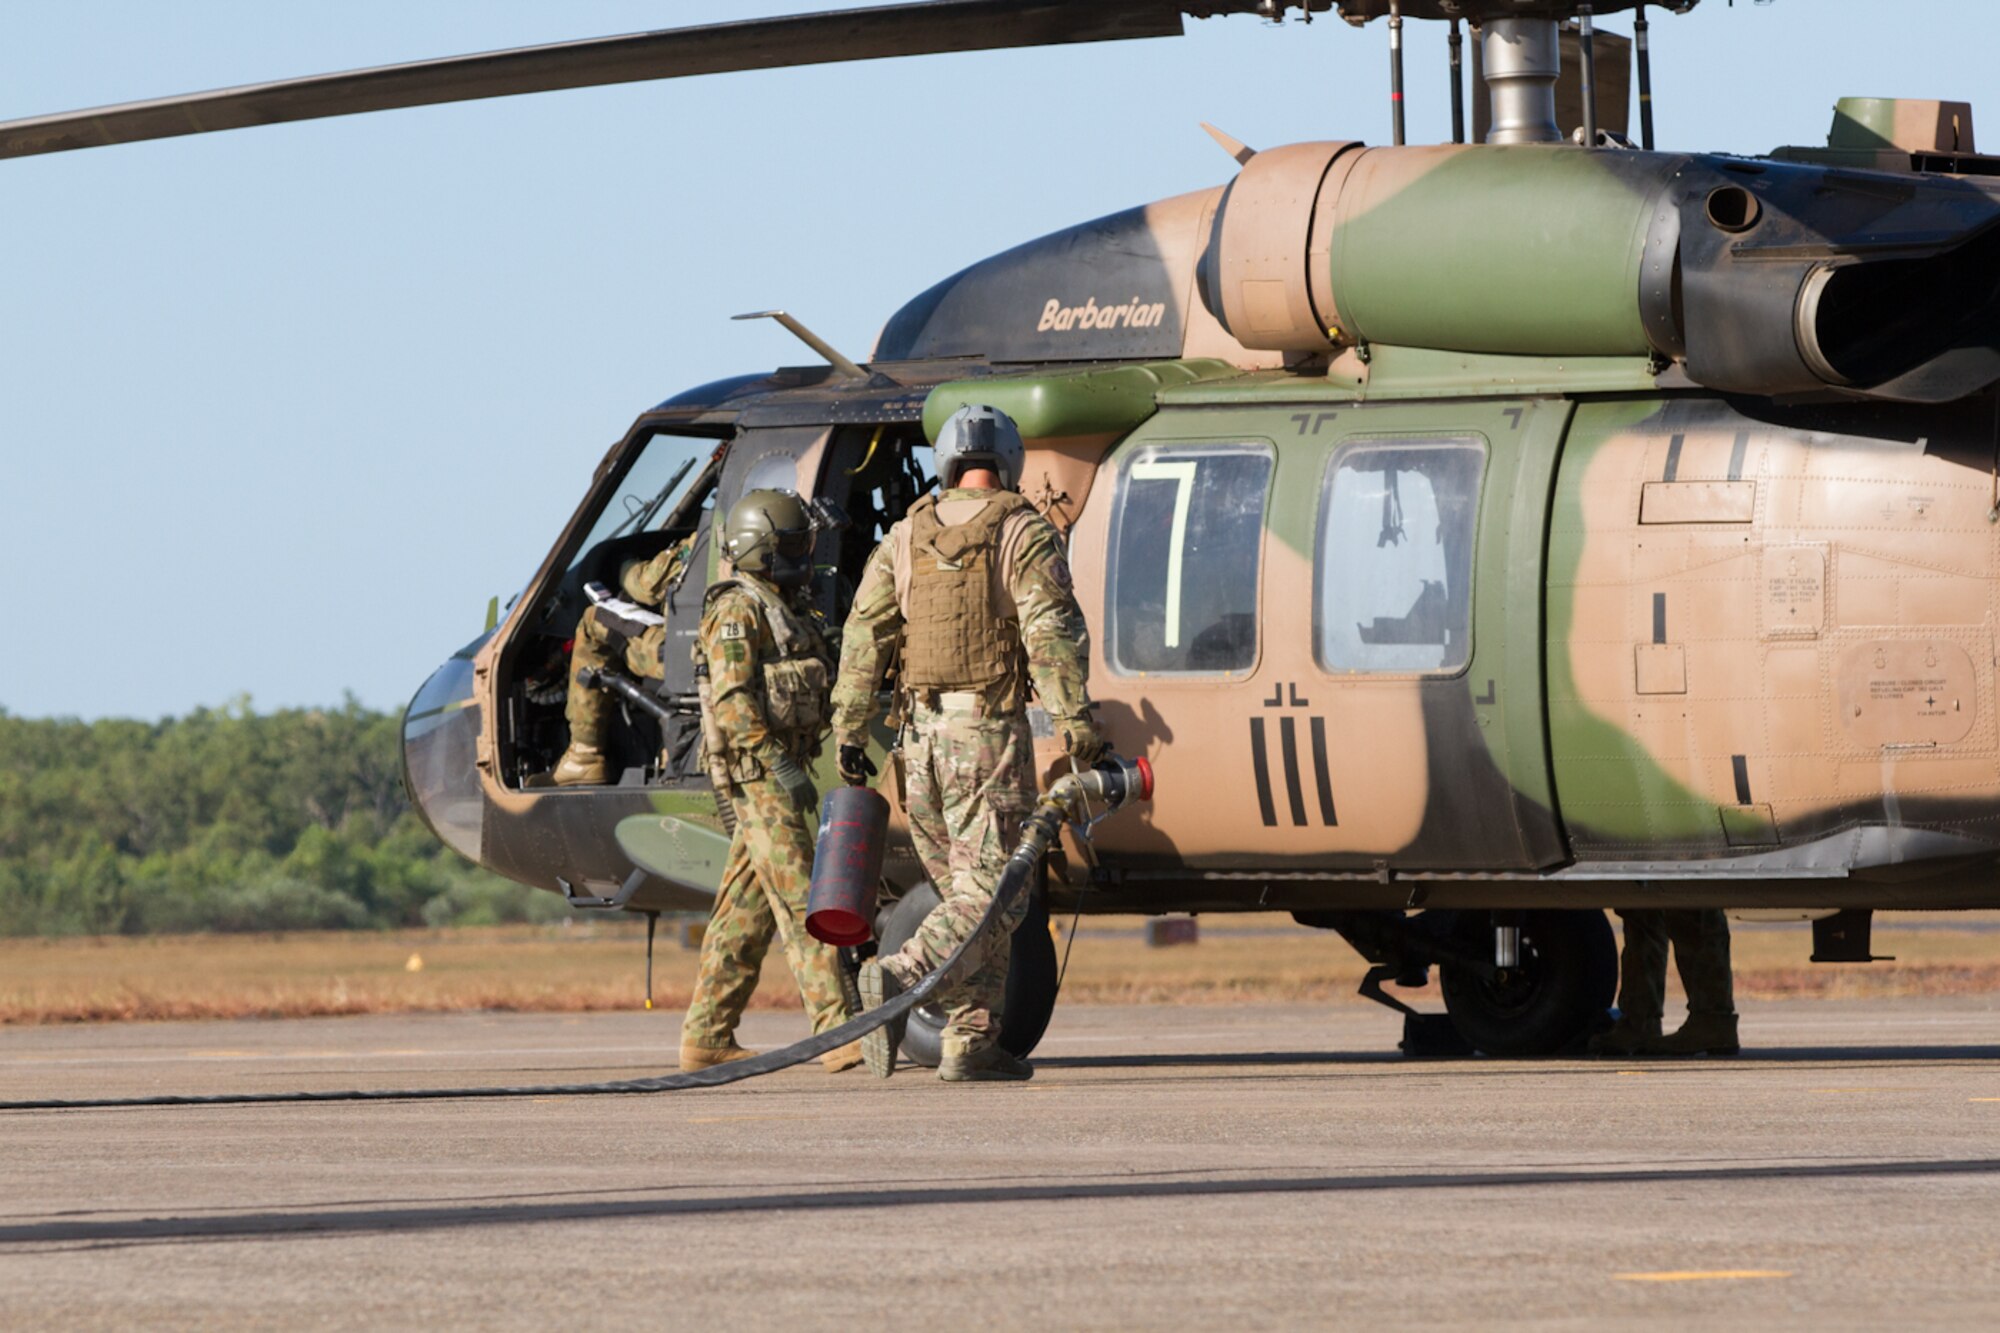 U.S. Air Force Airmen from the 18th Logistics Readiness Squadron from Kadena Air Base, Japan, partnered with the Australian Army during a refueling exercise at the Royal Australian Air Force Base Darwin, July 8, 2015, in Darwin, Australia, during Talisman Sabre 2015. Talisman Sabre is a biennial exercise that provides an invaluable opportunity for nearly 30,000 U.S. and Australian defense forces to conduct operations in a combined, joint and interagency environment that will increase both countries’ ability to plan and execute a full range of operations from combat missions to humanitarian assistance efforts. (U.S. Army photo by Sgt. Steven Peterson/Released)